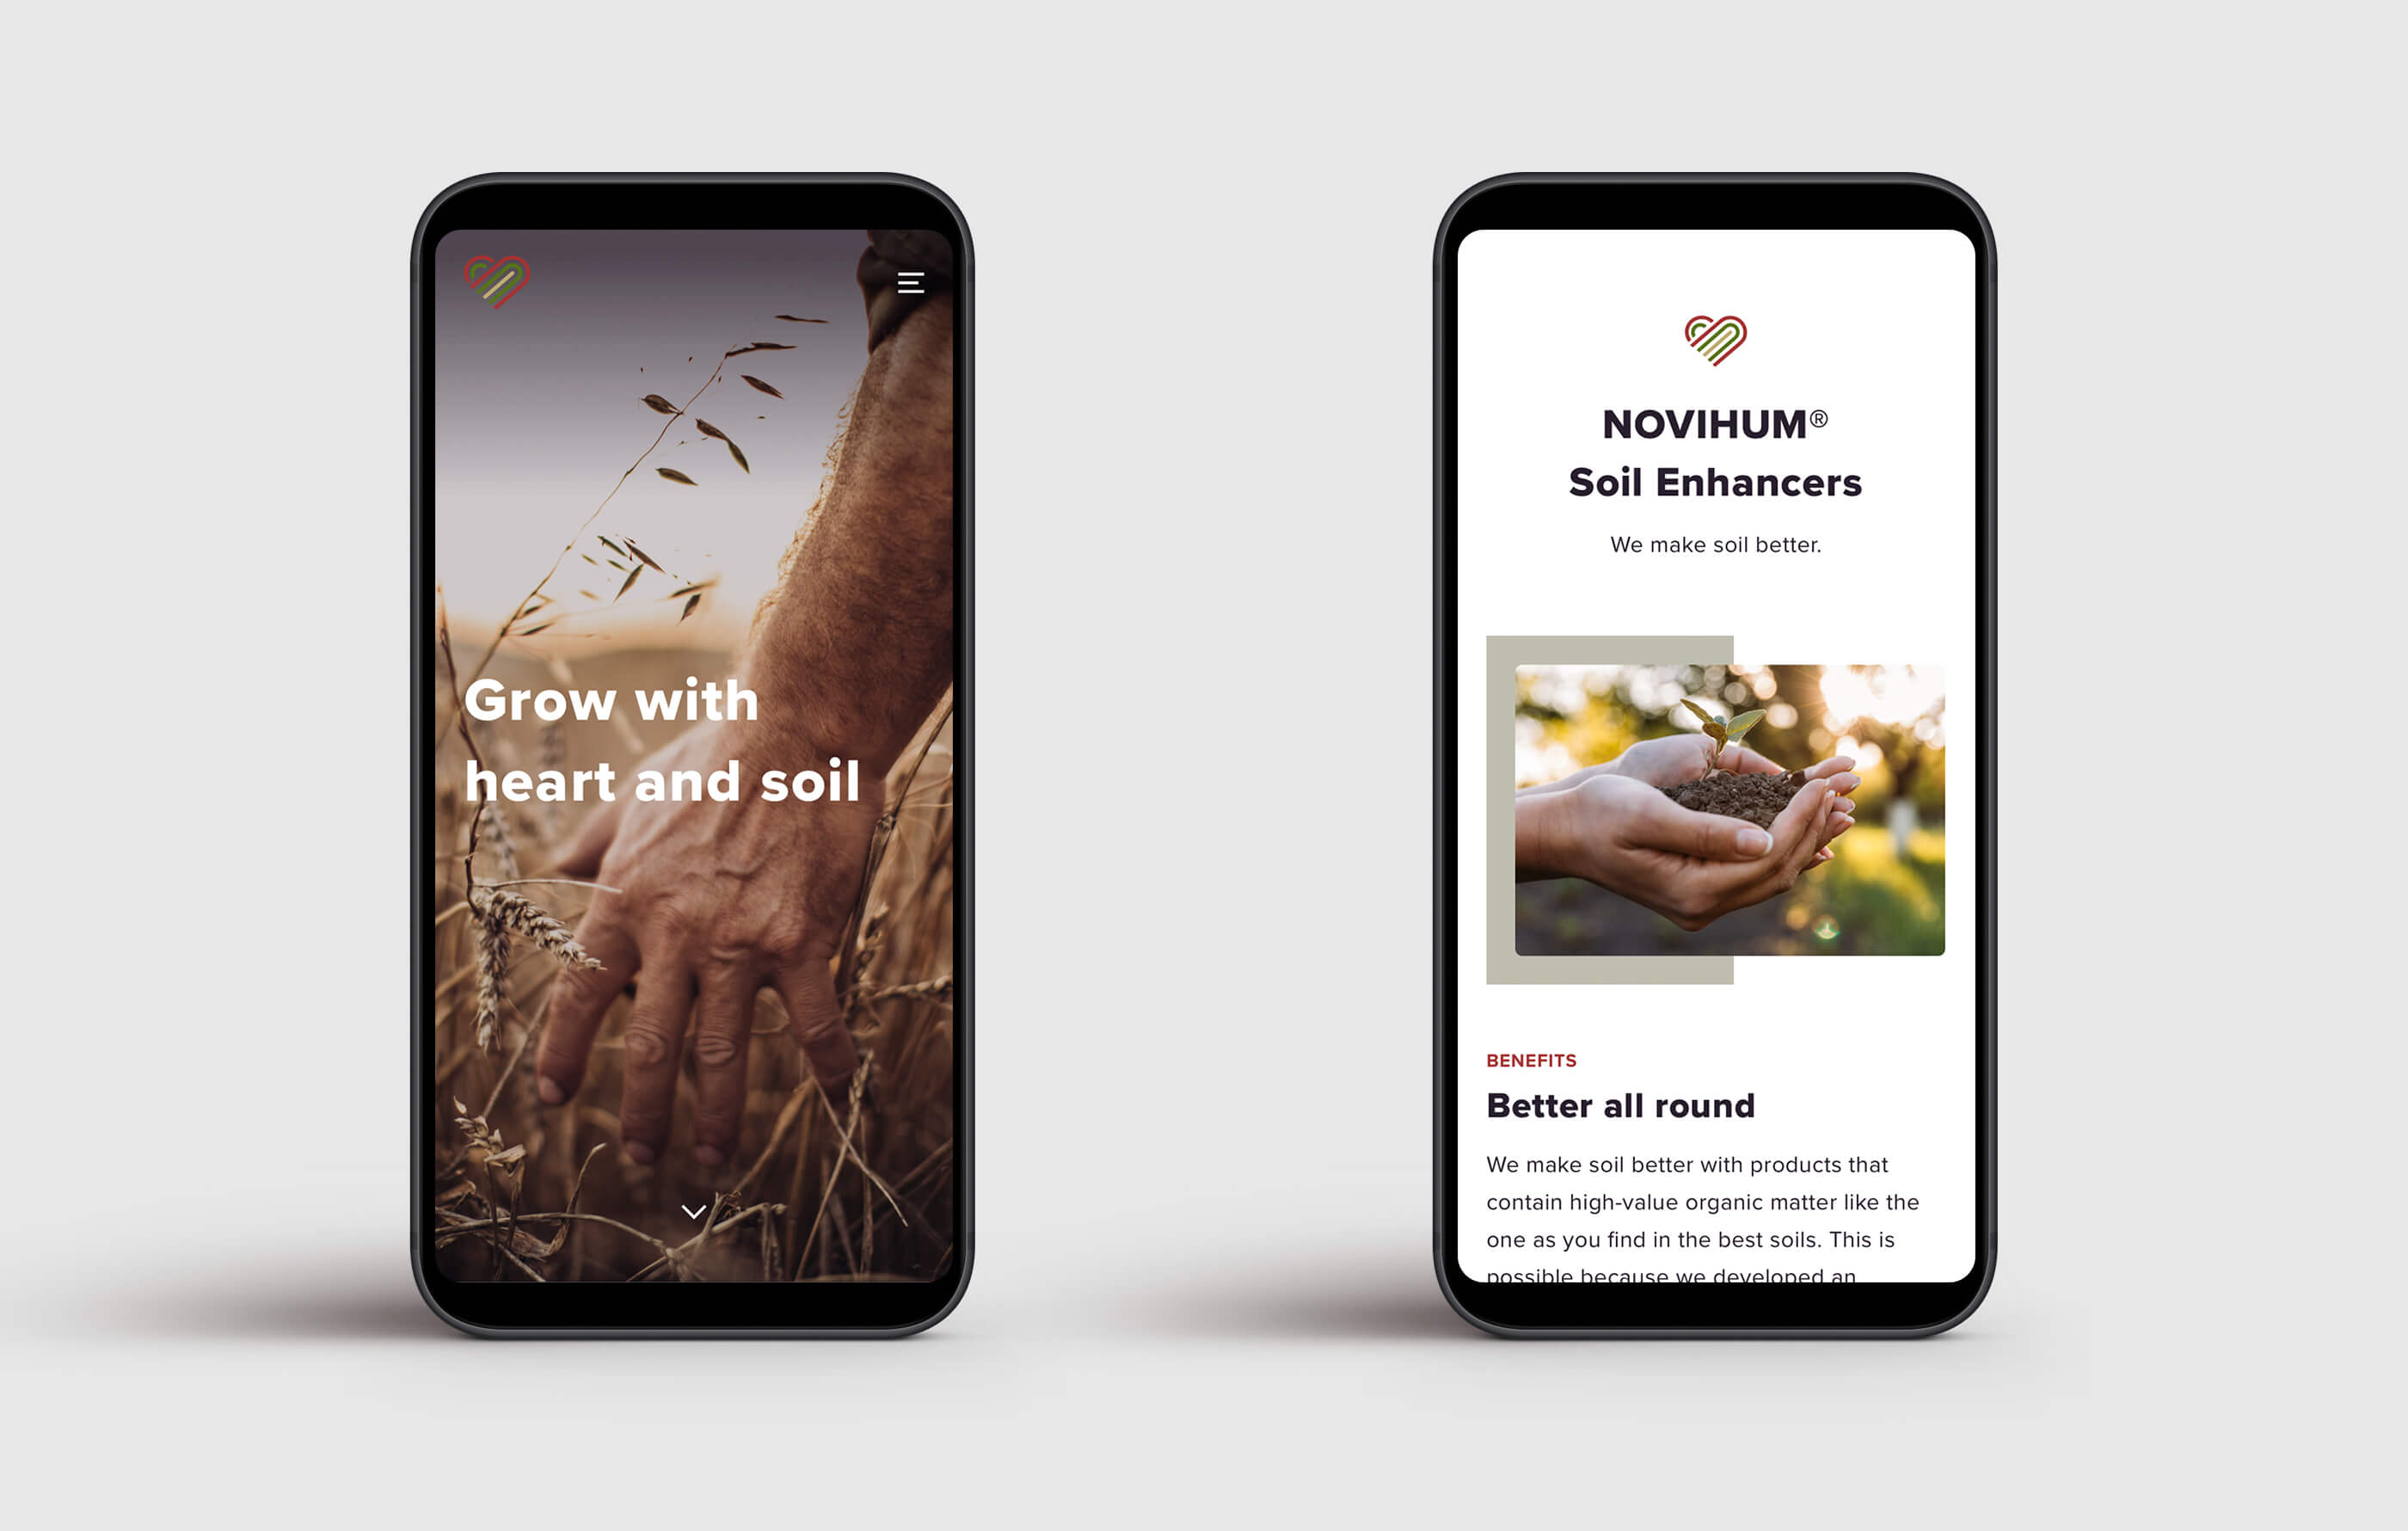 Two mobile phone mockups of the mobile homepage design, featuring the benefits of Novihum and 'Grow with Heart and Soil' hero